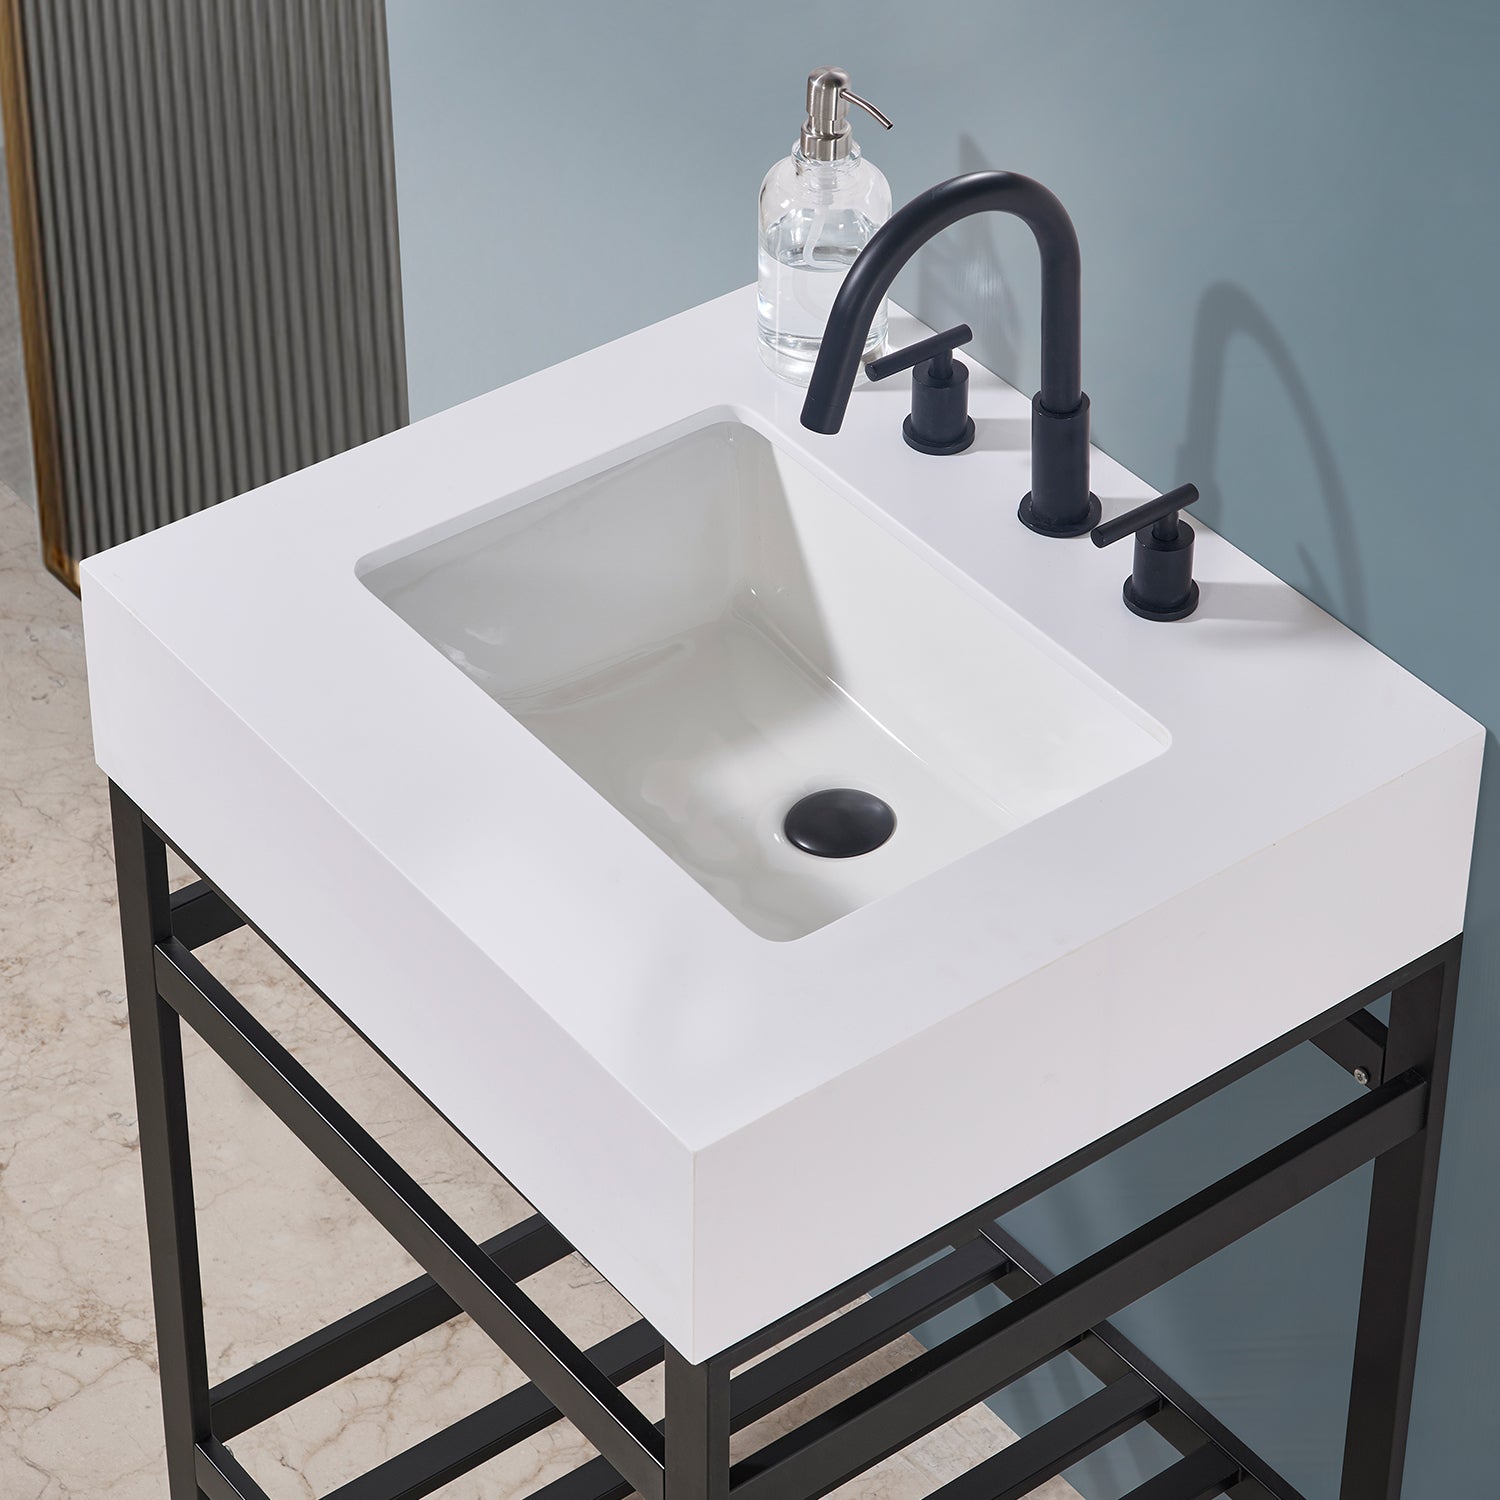 Edolo 24" Single Stainless Steel Vanity Console in Matte Black with Snow White Stone Countertop